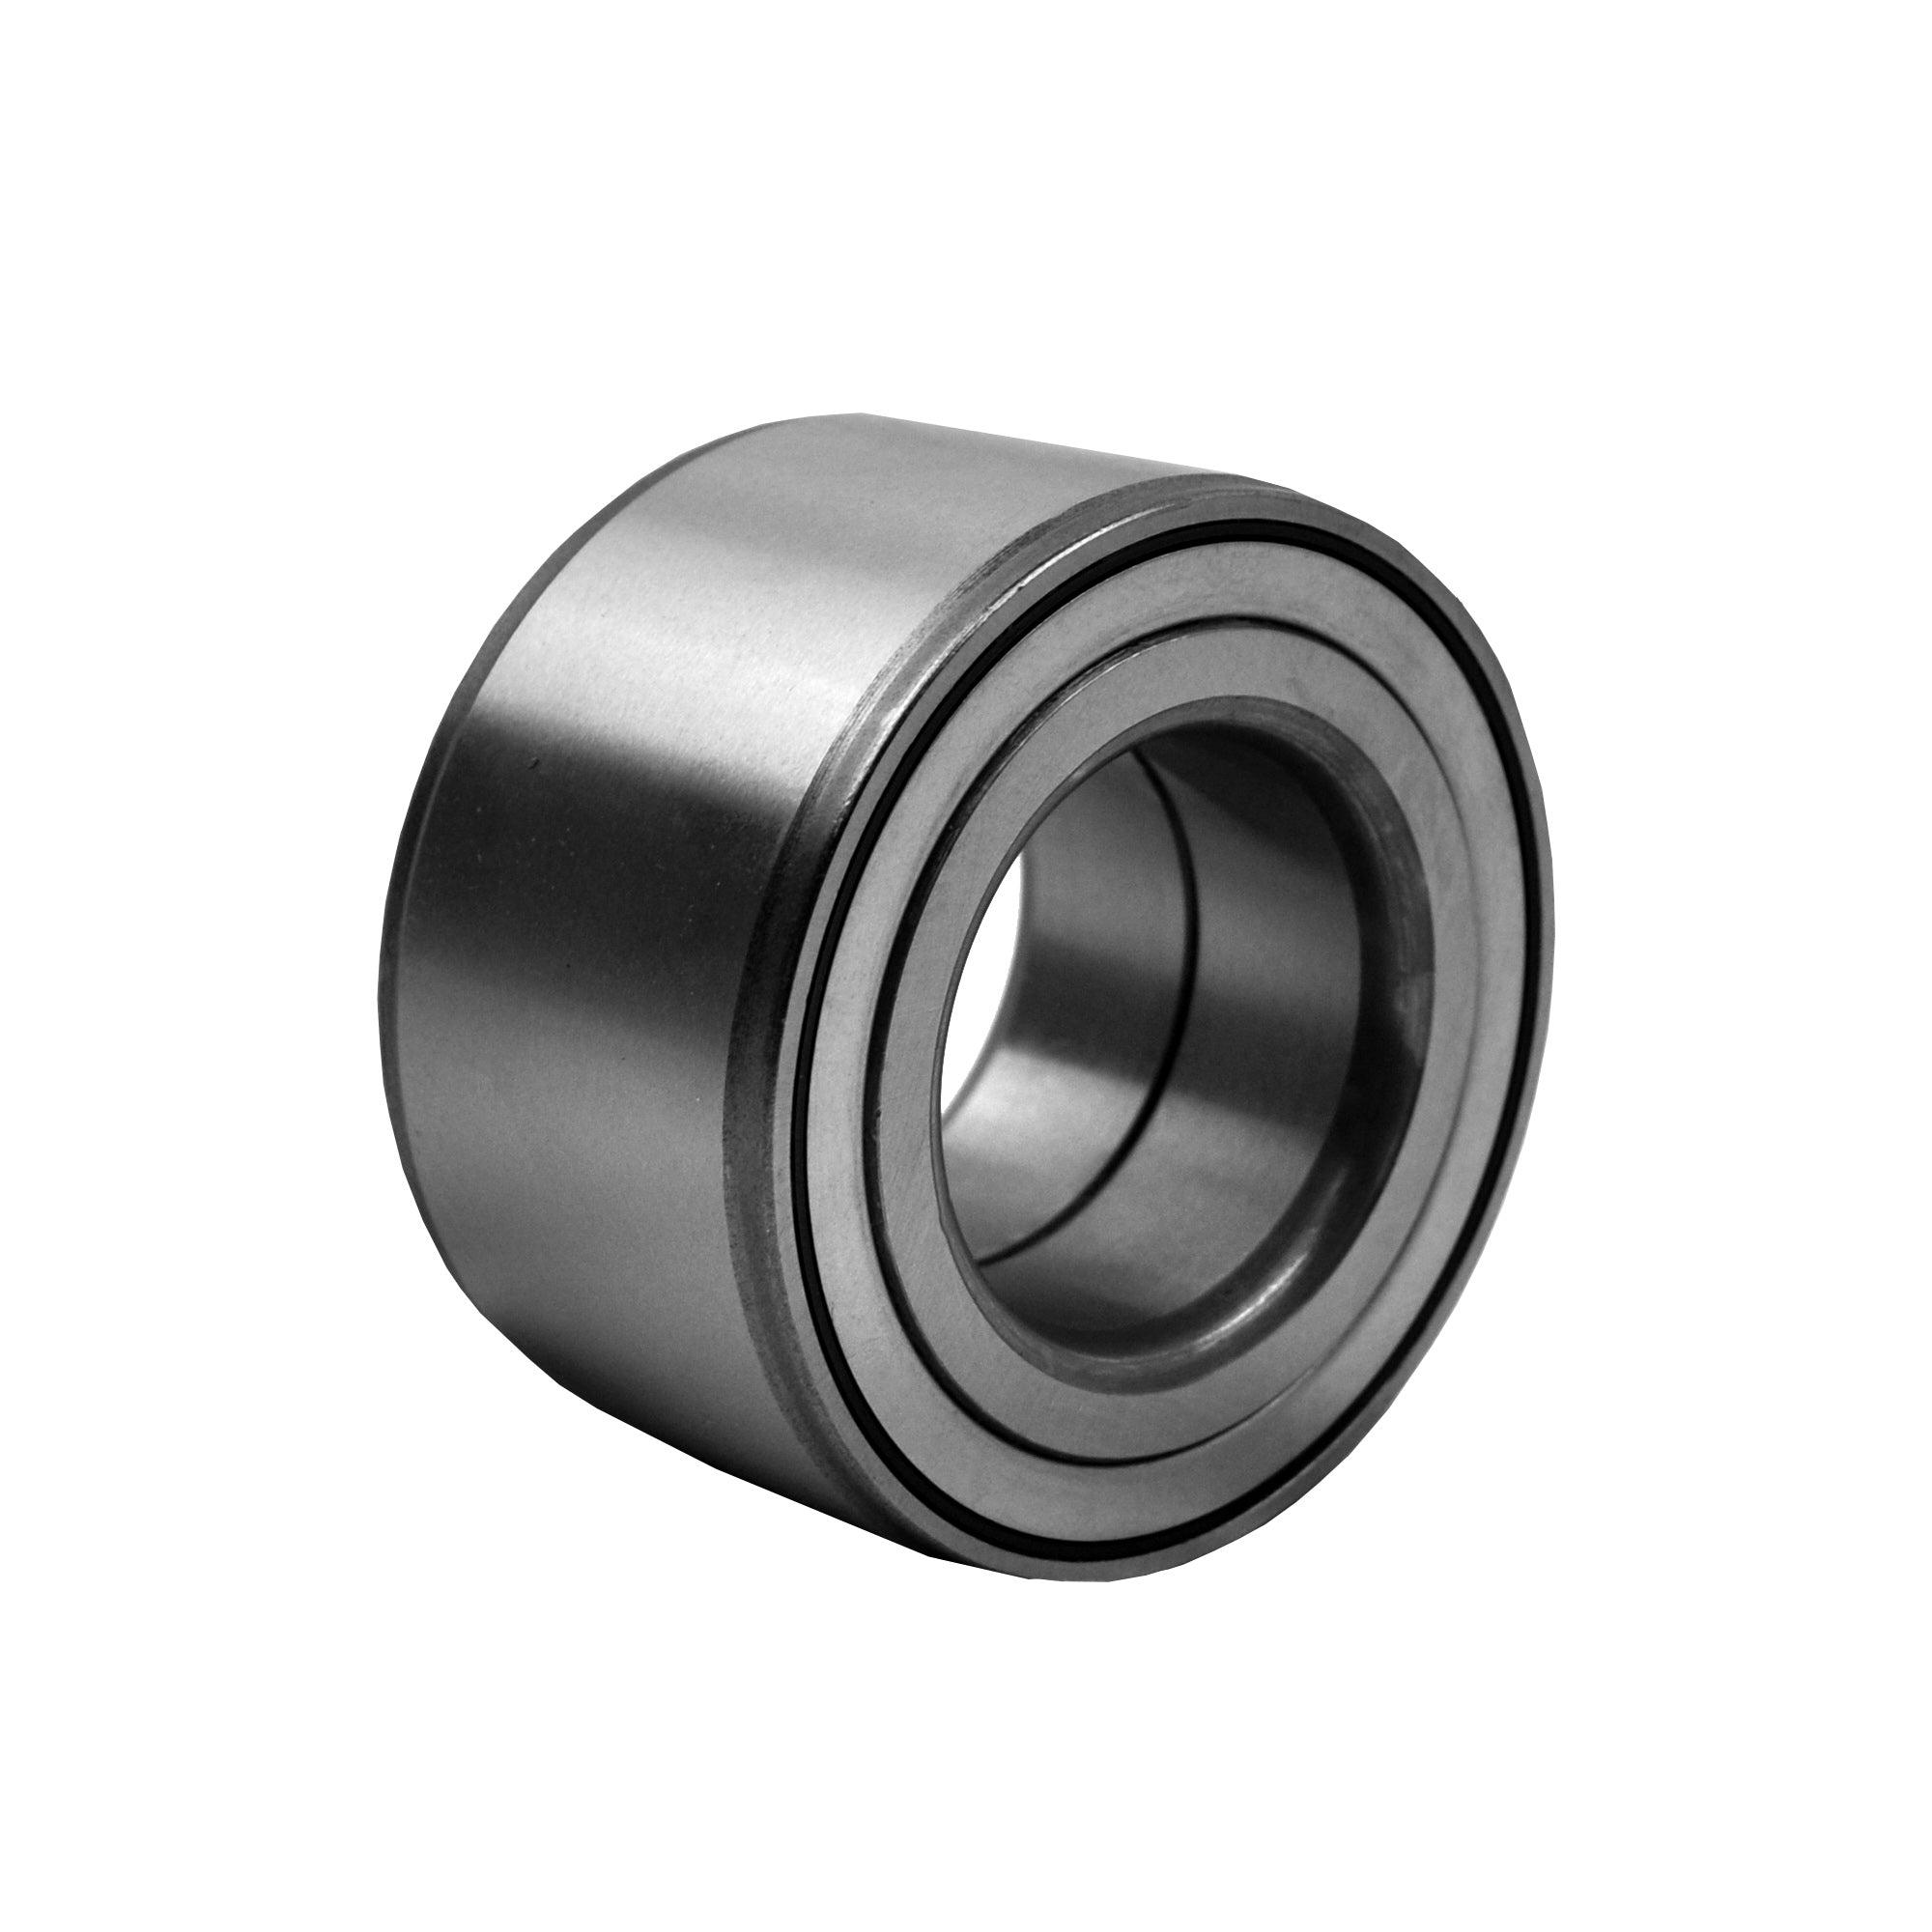 Wheel Bearing for Can Am Outlander 800 Max 